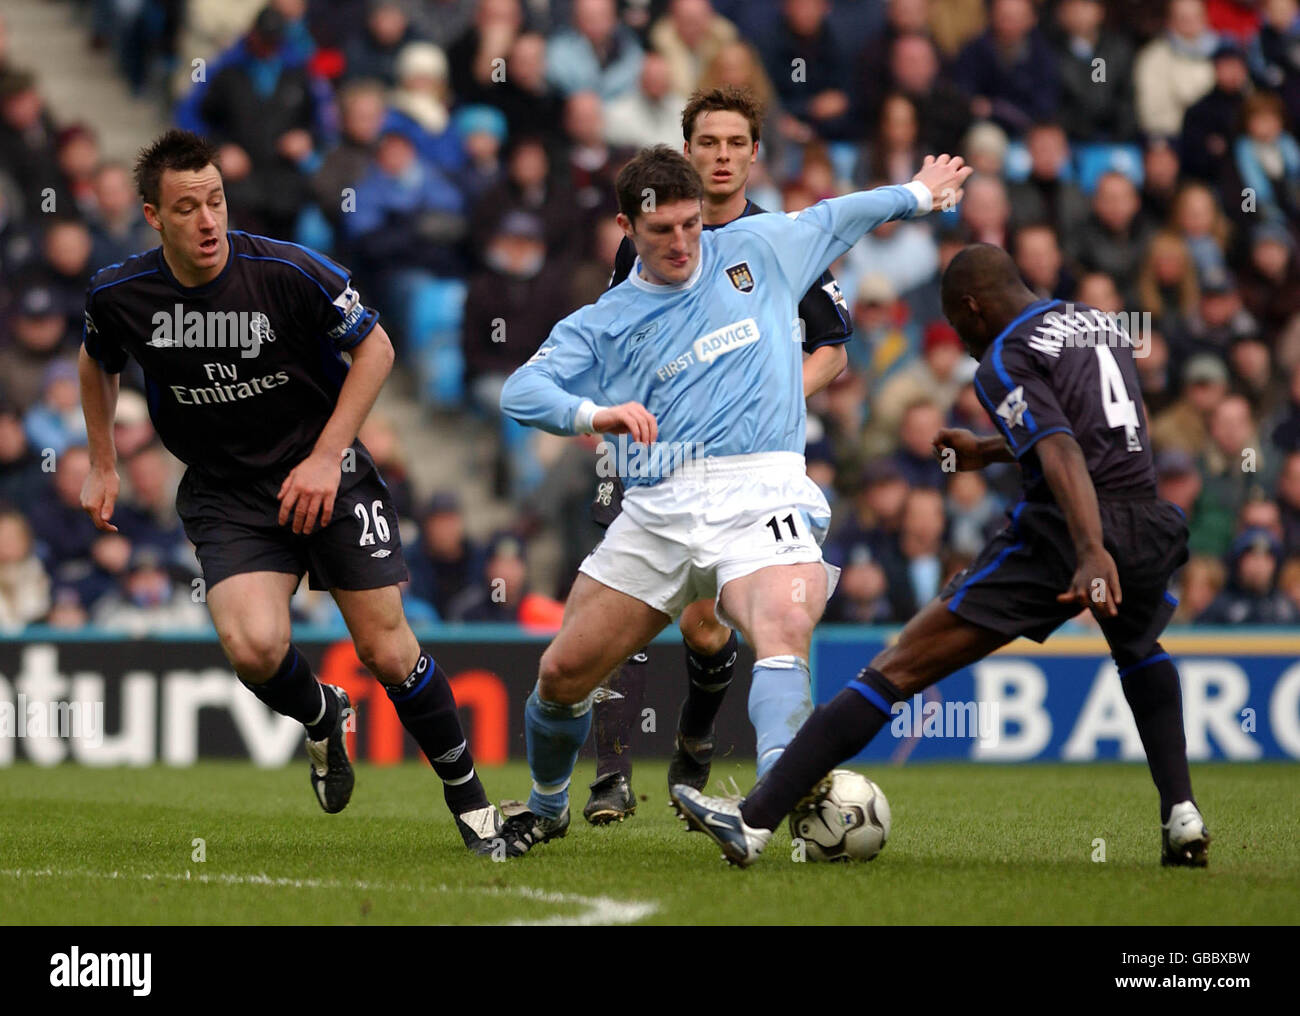 Soccer - FA Barclaycard Premiership - Manchester City v Chelsea. Manchester City's Jonathan Macken battles for the ball with Chelsea's John Terry (l) and Claude Makelele (r) Stock Photo